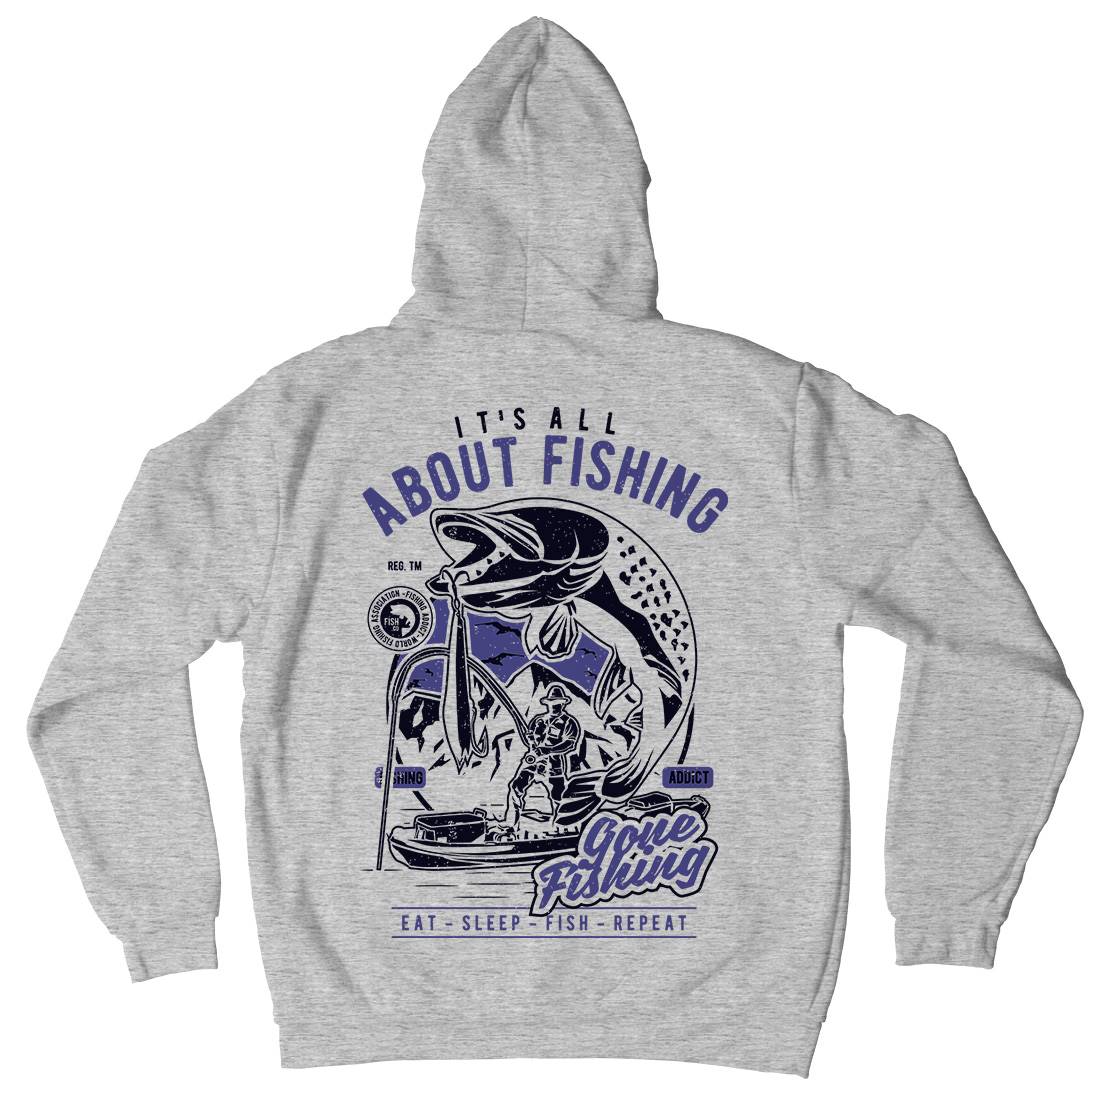 All About Kids Crew Neck Hoodie Fishing A604